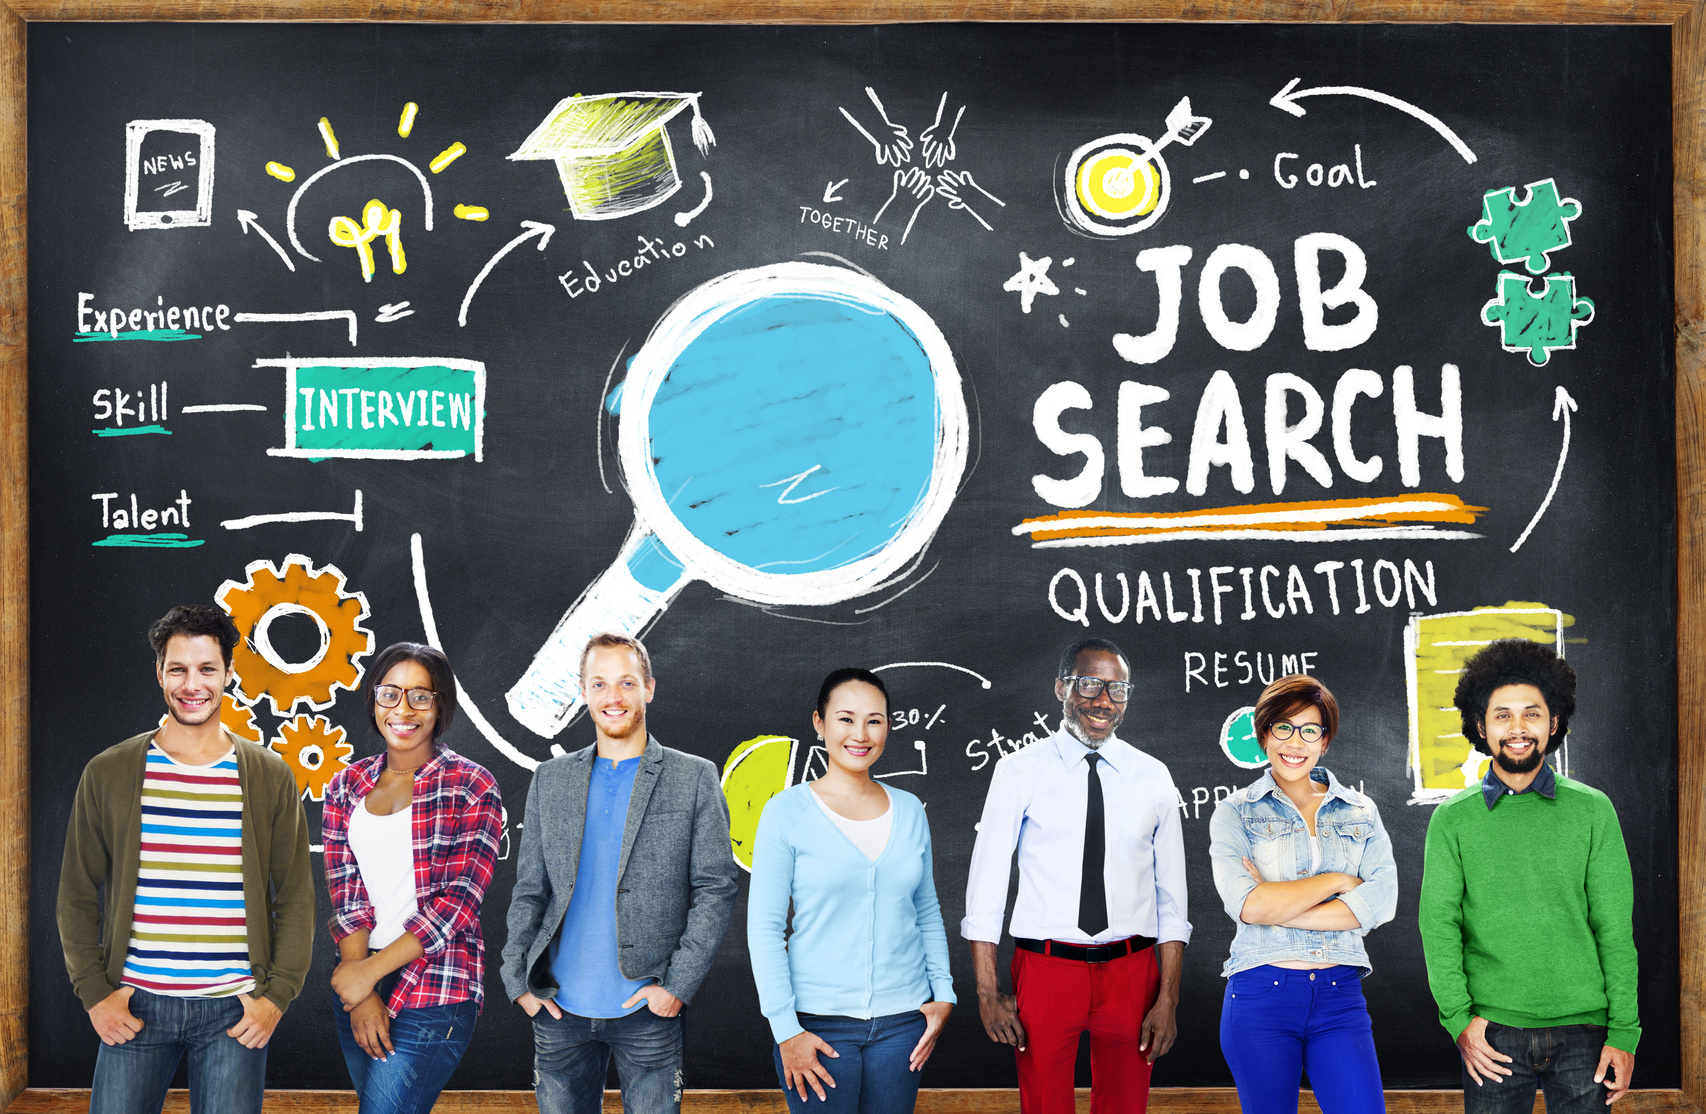 3 Ways to conduct a successful job search